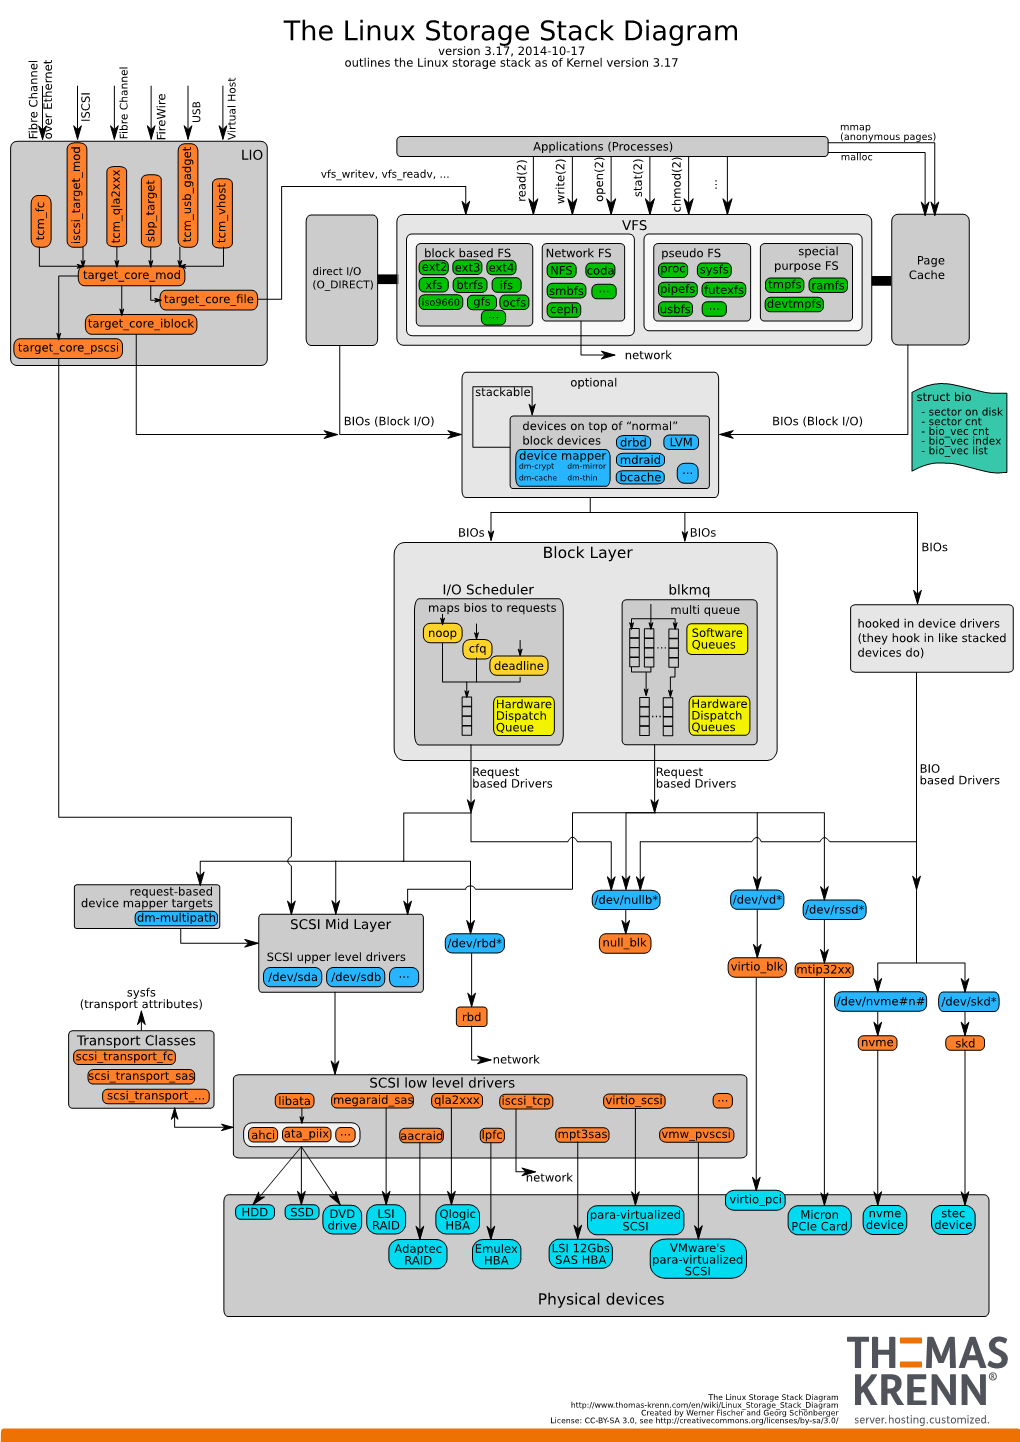 The Linux Storage Stack Diagram